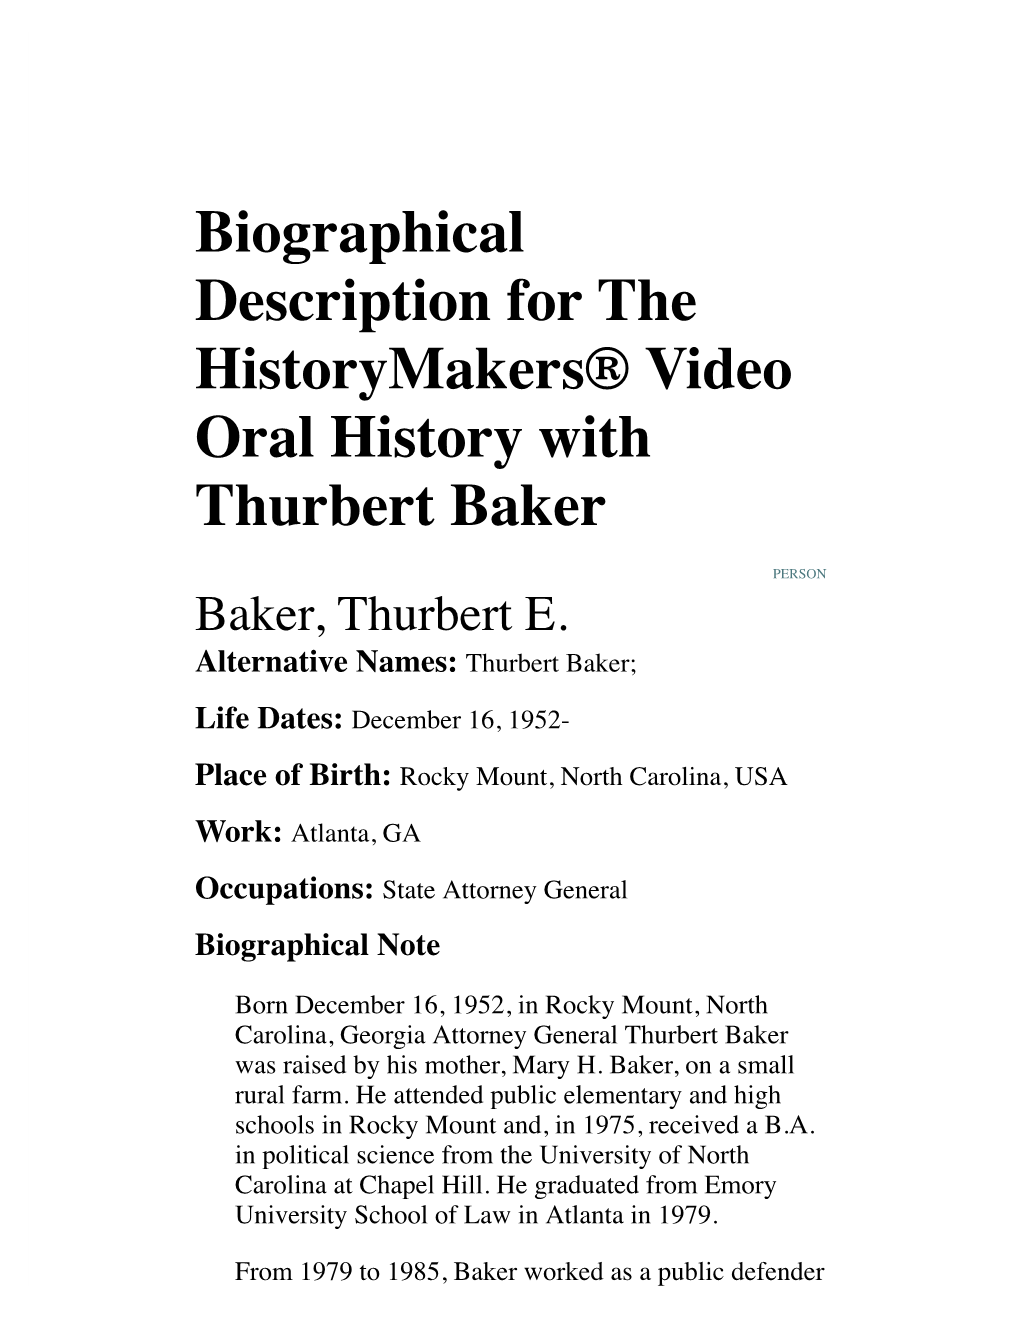 Biographical Description for the Historymakers® Video Oral History with Thurbert Baker